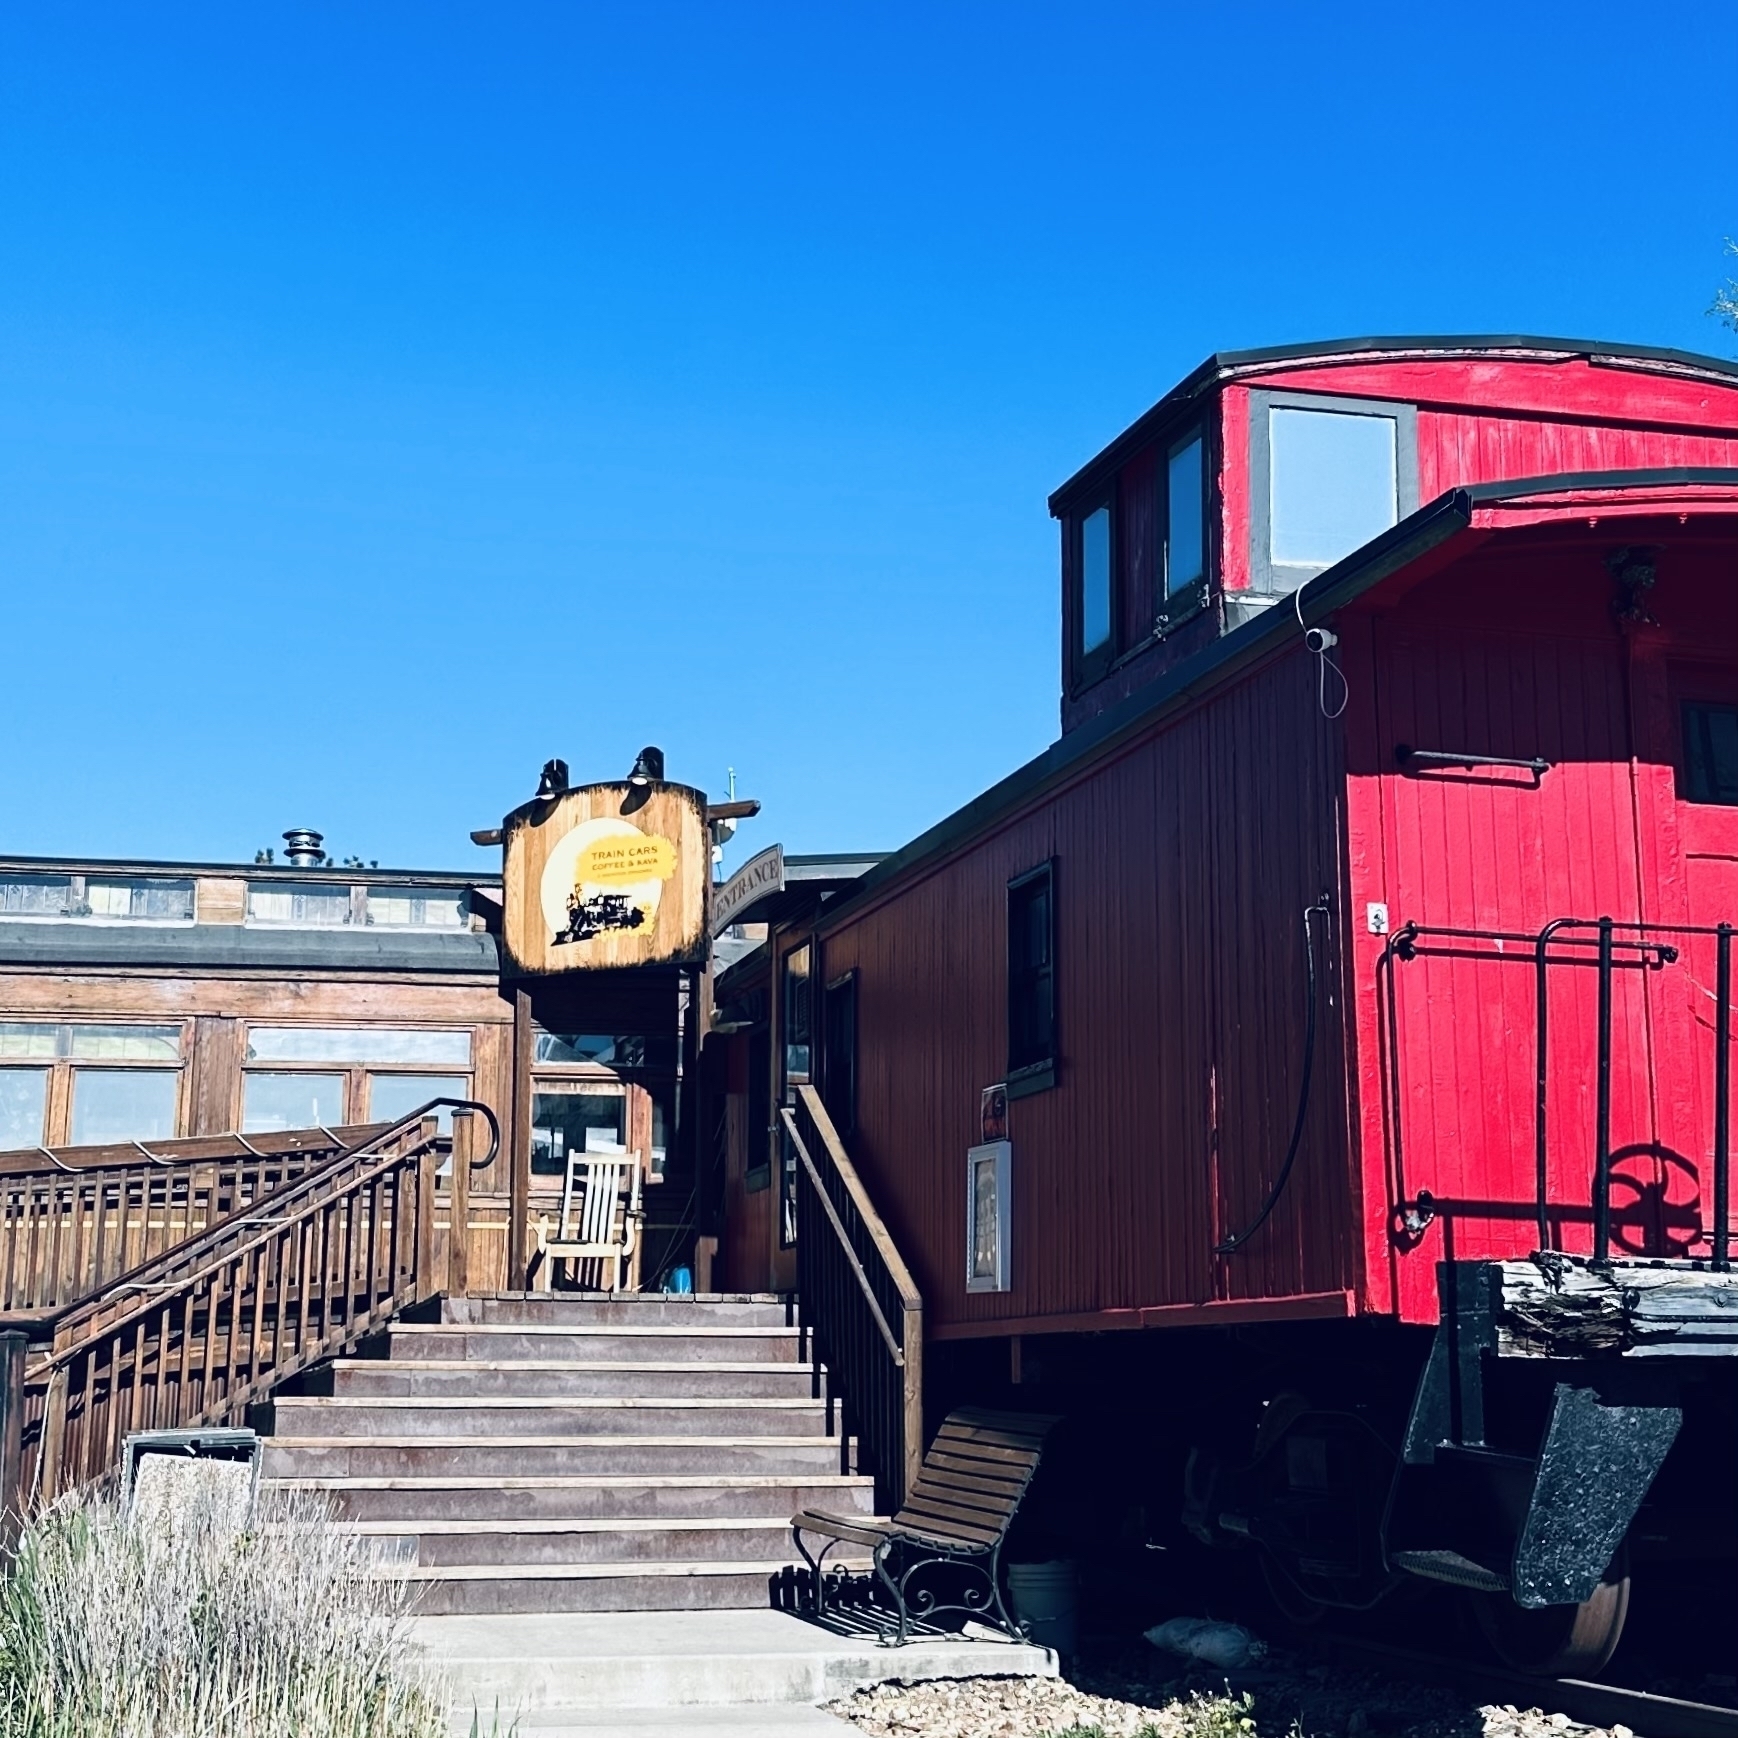 Caboose and train cars with stairs leading up to door.